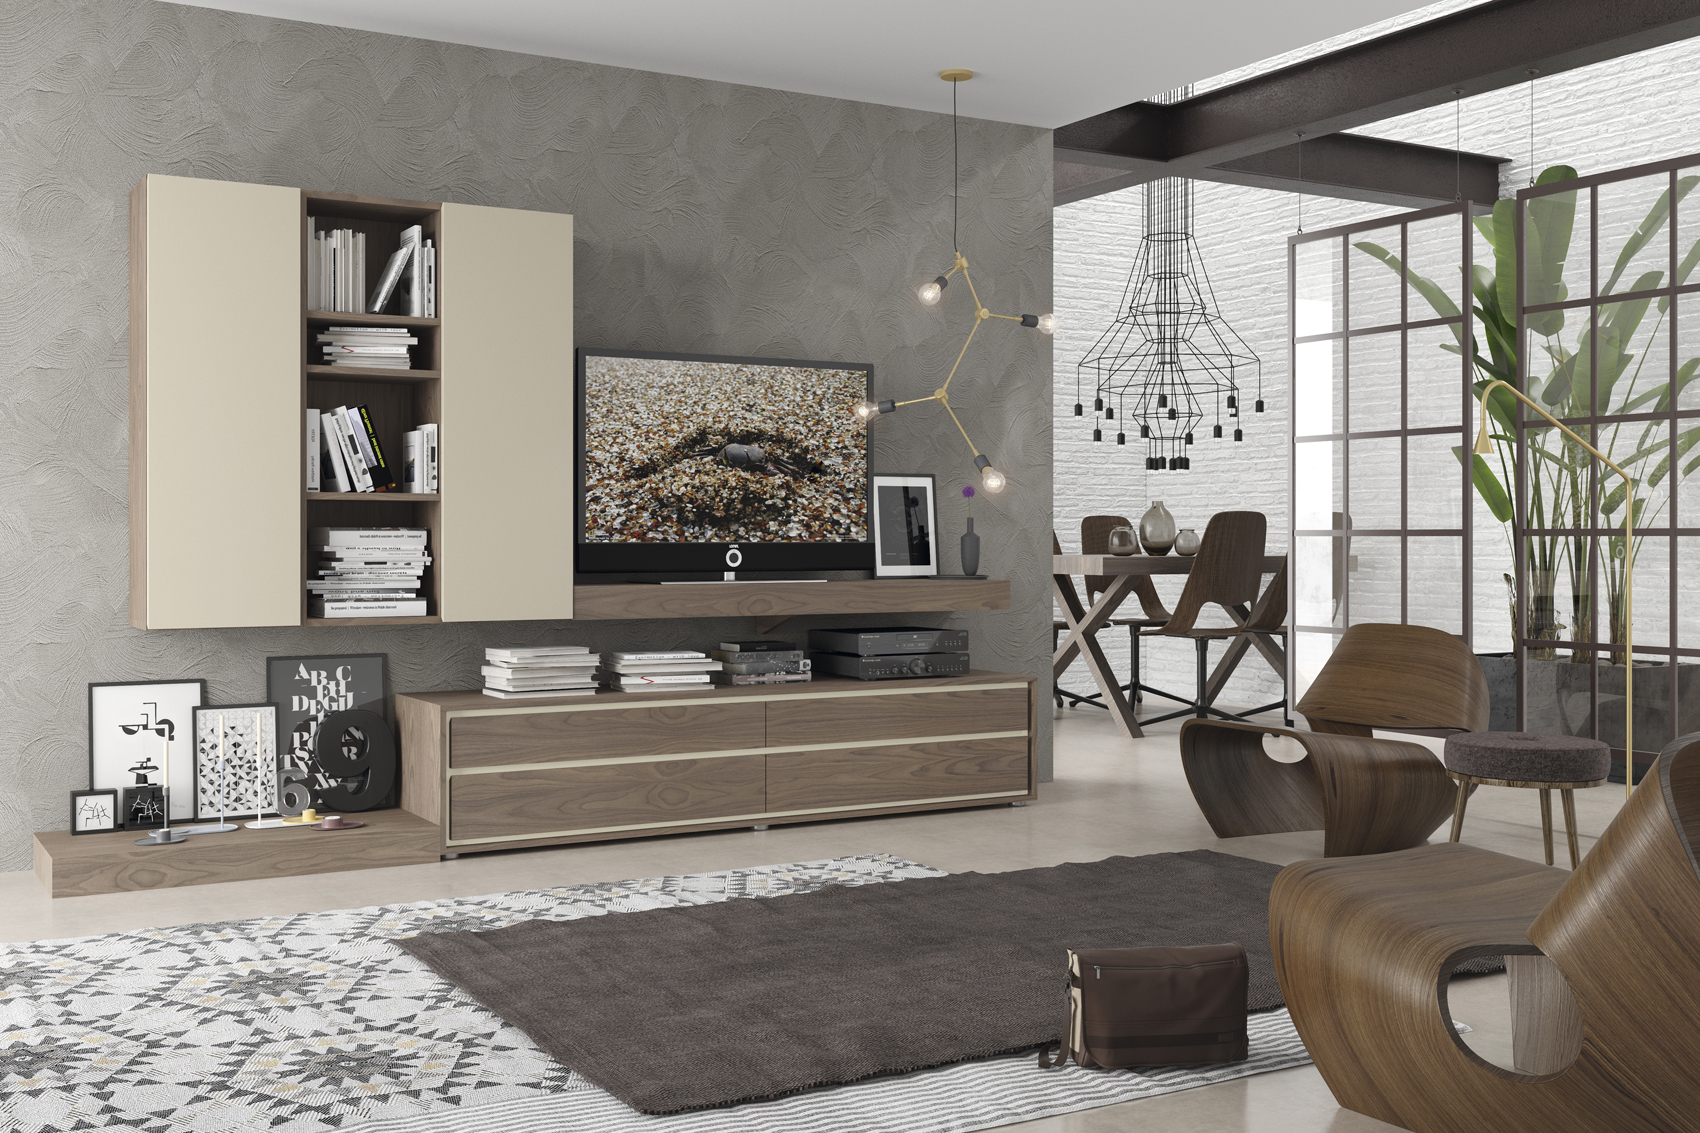 Brands MSC Modern Wall Unit, Italy Composition L41